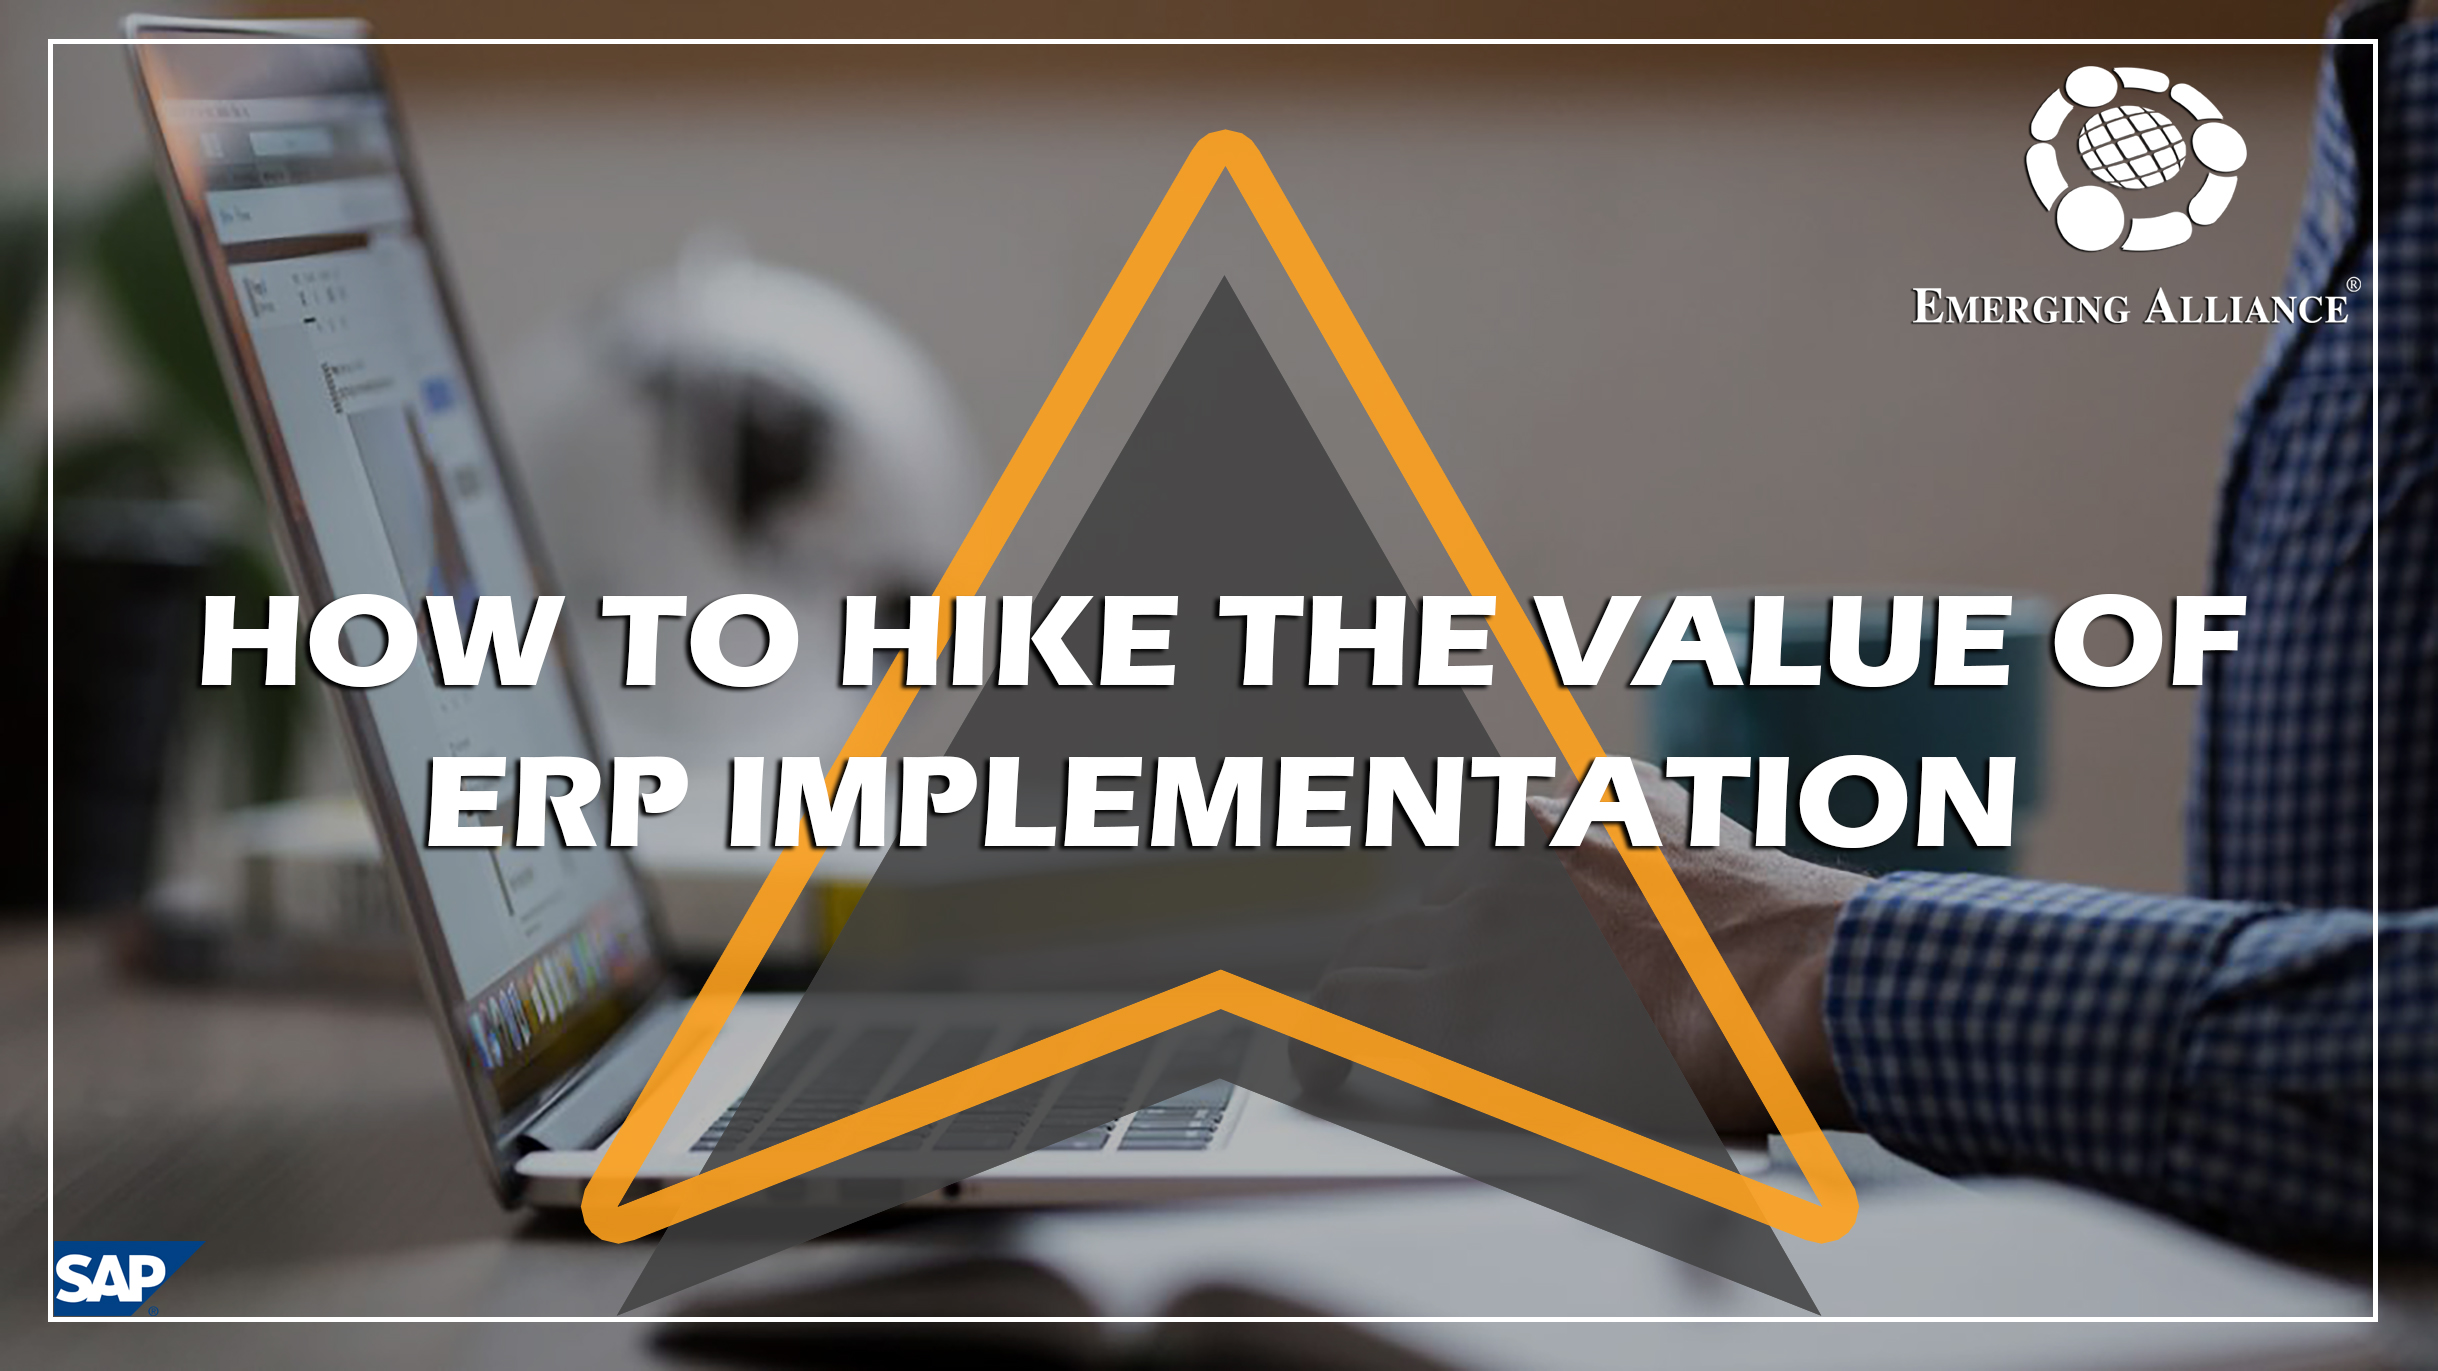 HIKE THE VALUE OF ERP IMPLEMENTATION